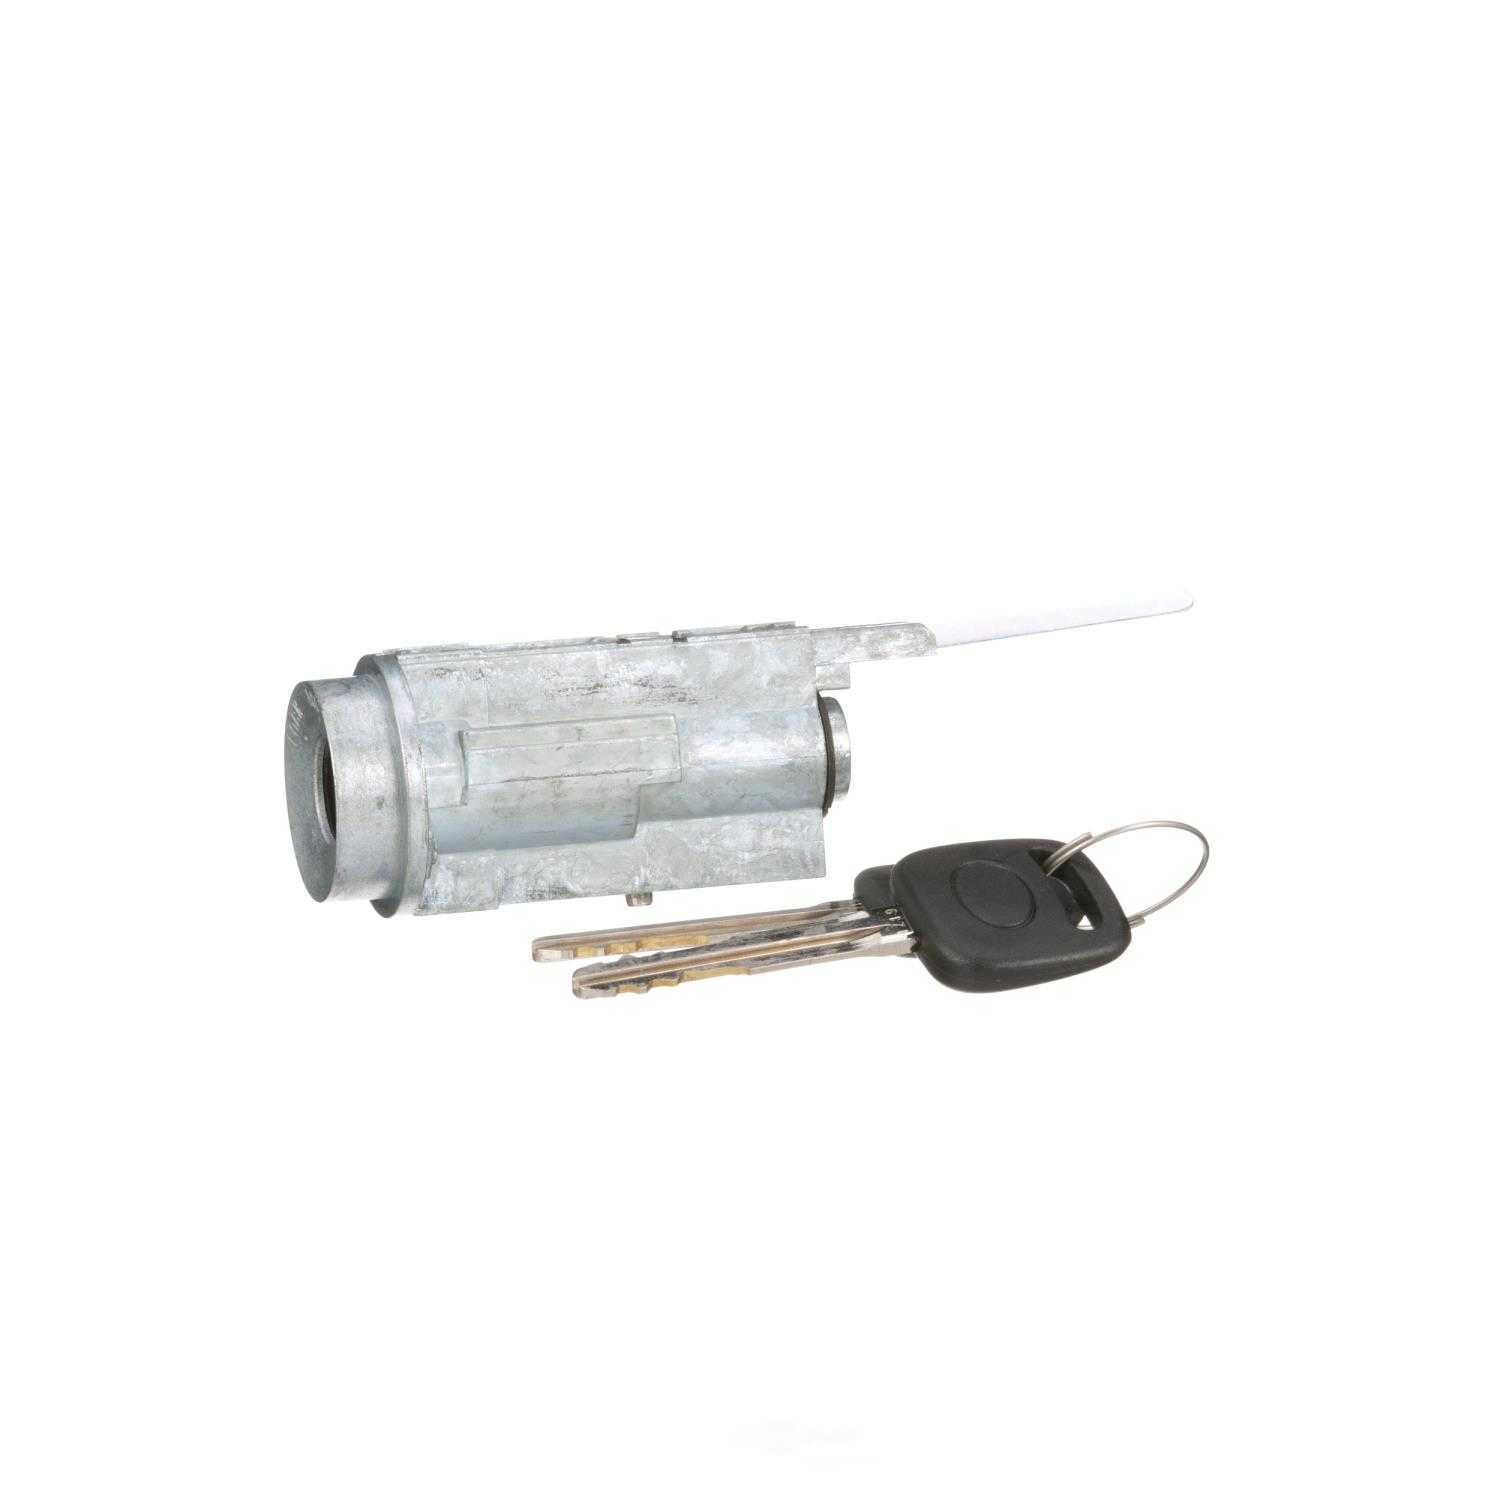 STANDARD MOTOR PRODUCTS - Ignition Lock Cylinder - STA US-249L